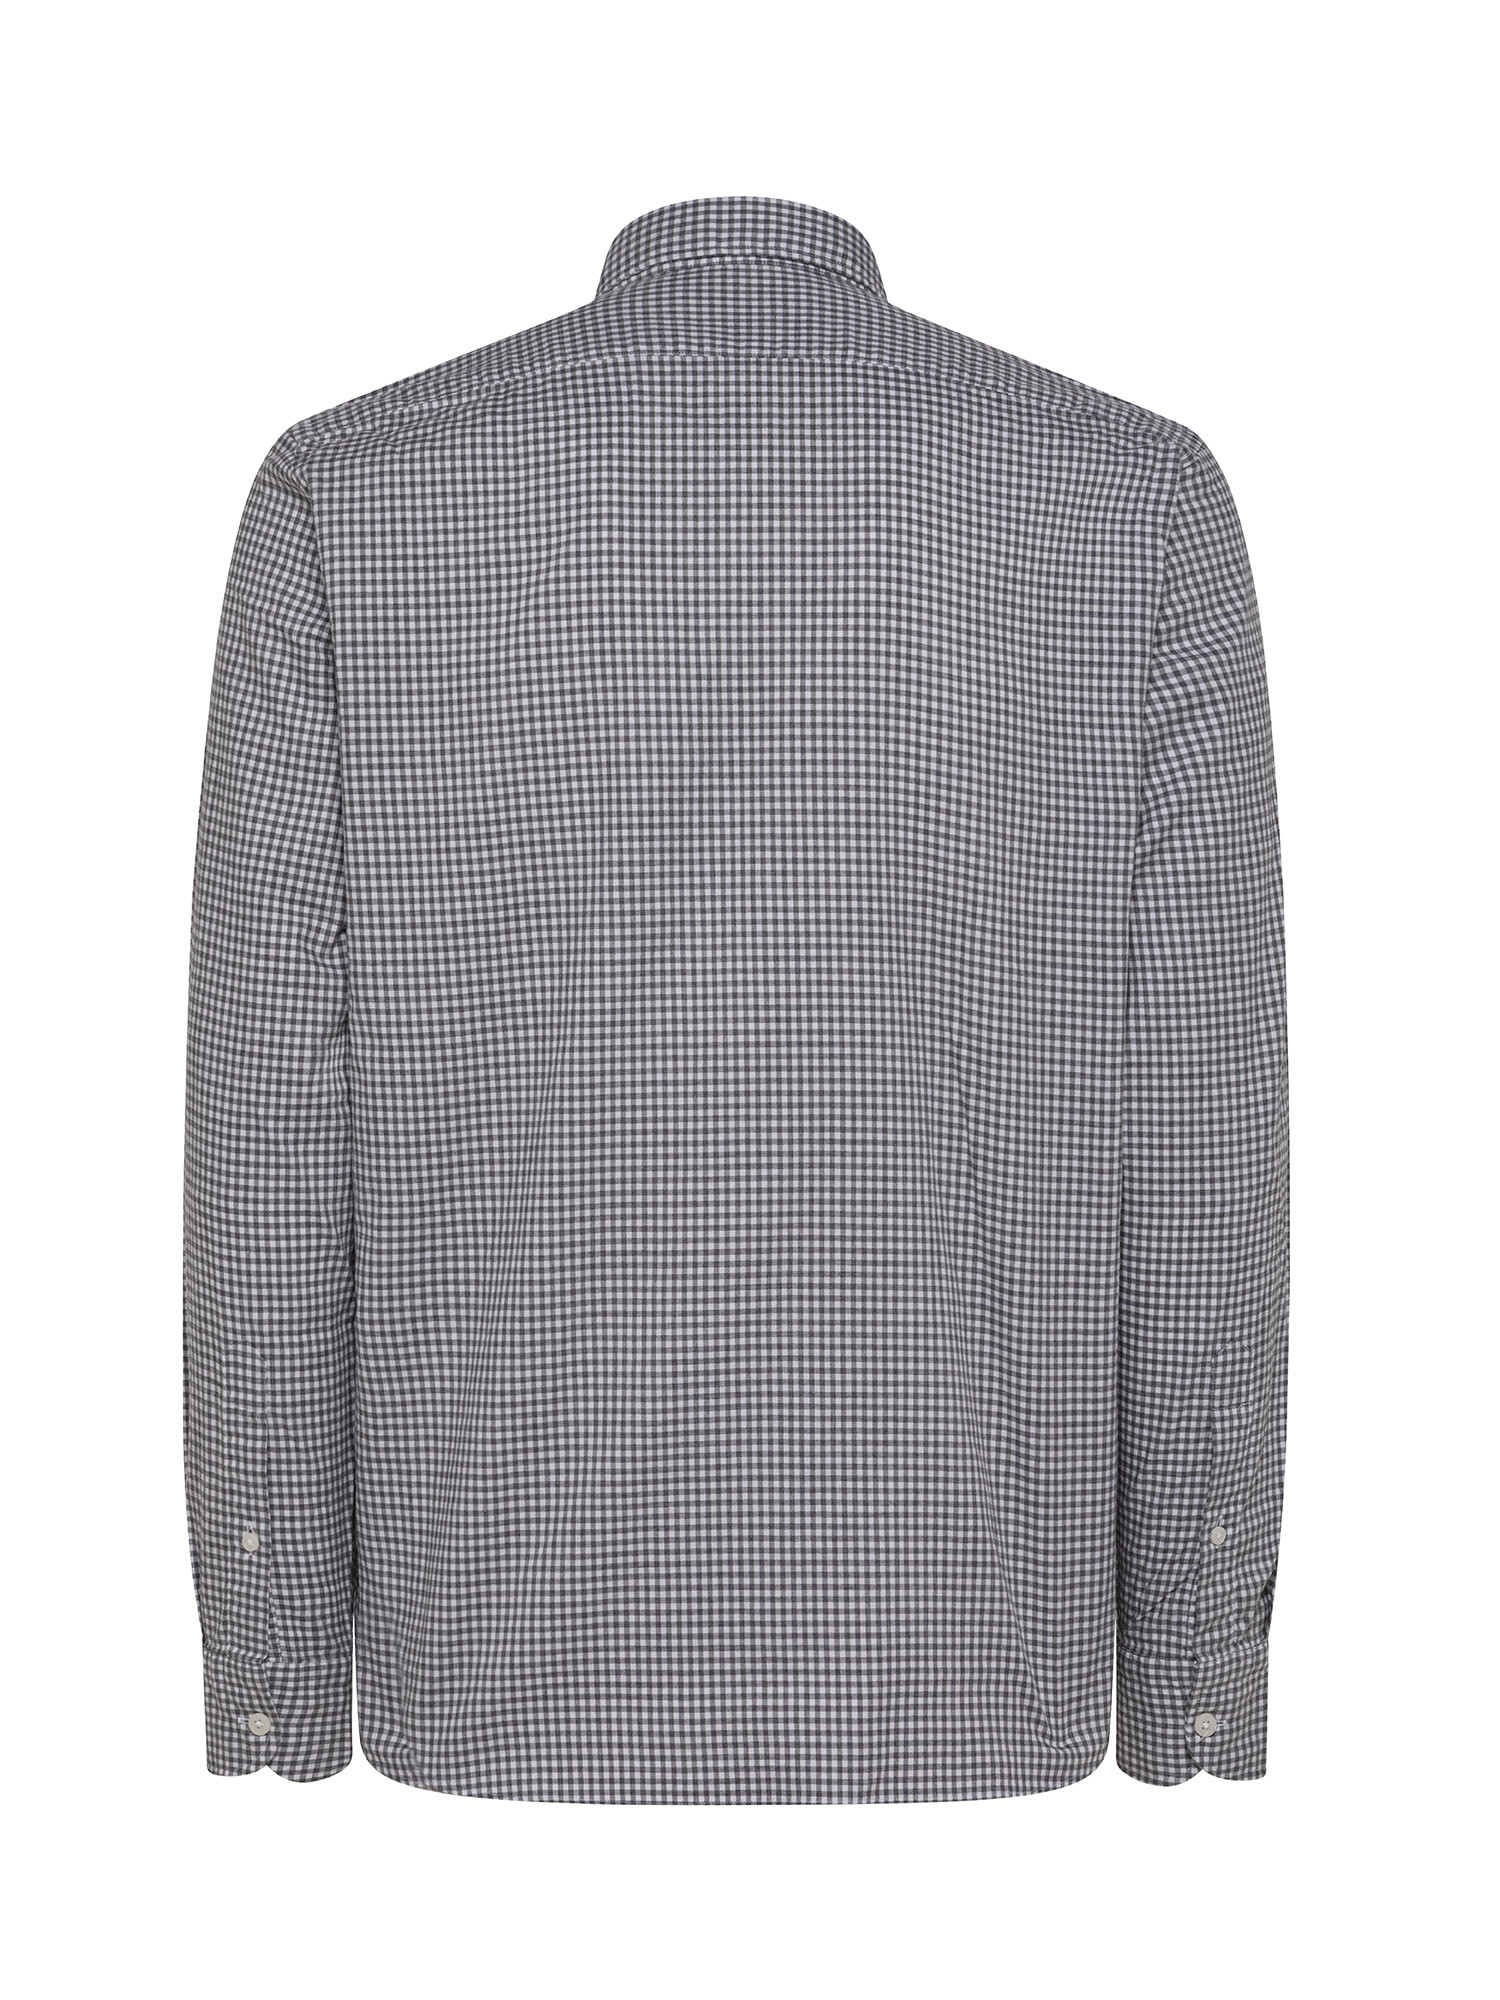 Tailor fit shirt in soft organic cotton flannel, Grey, large image number 2